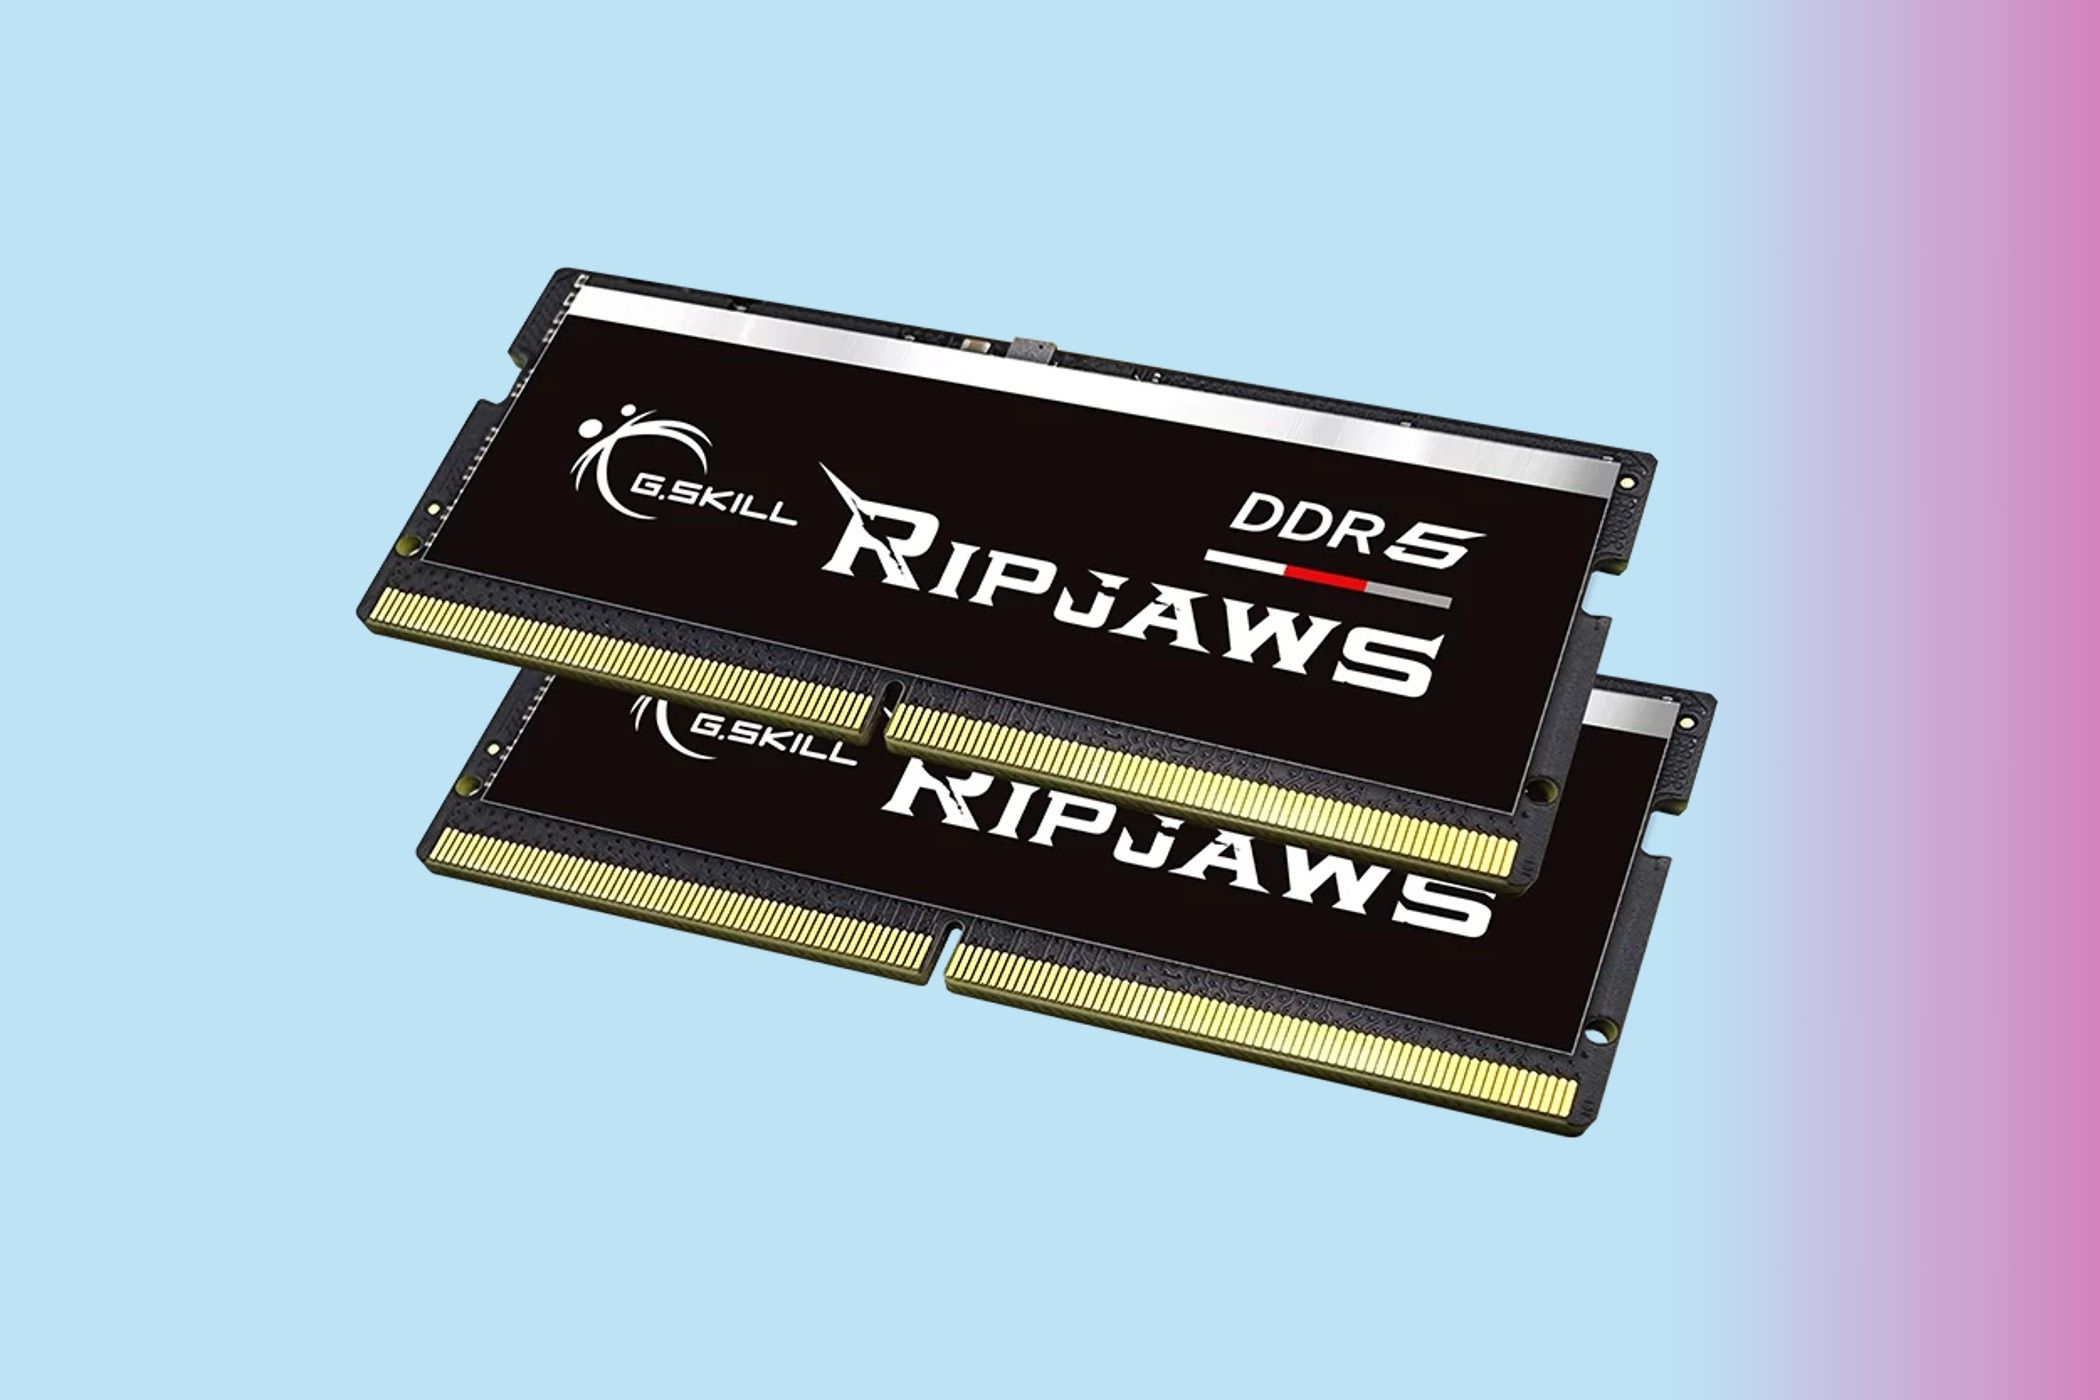 The G.SKILL Ripjaws DDR5 SO-DIMM on a blue background.